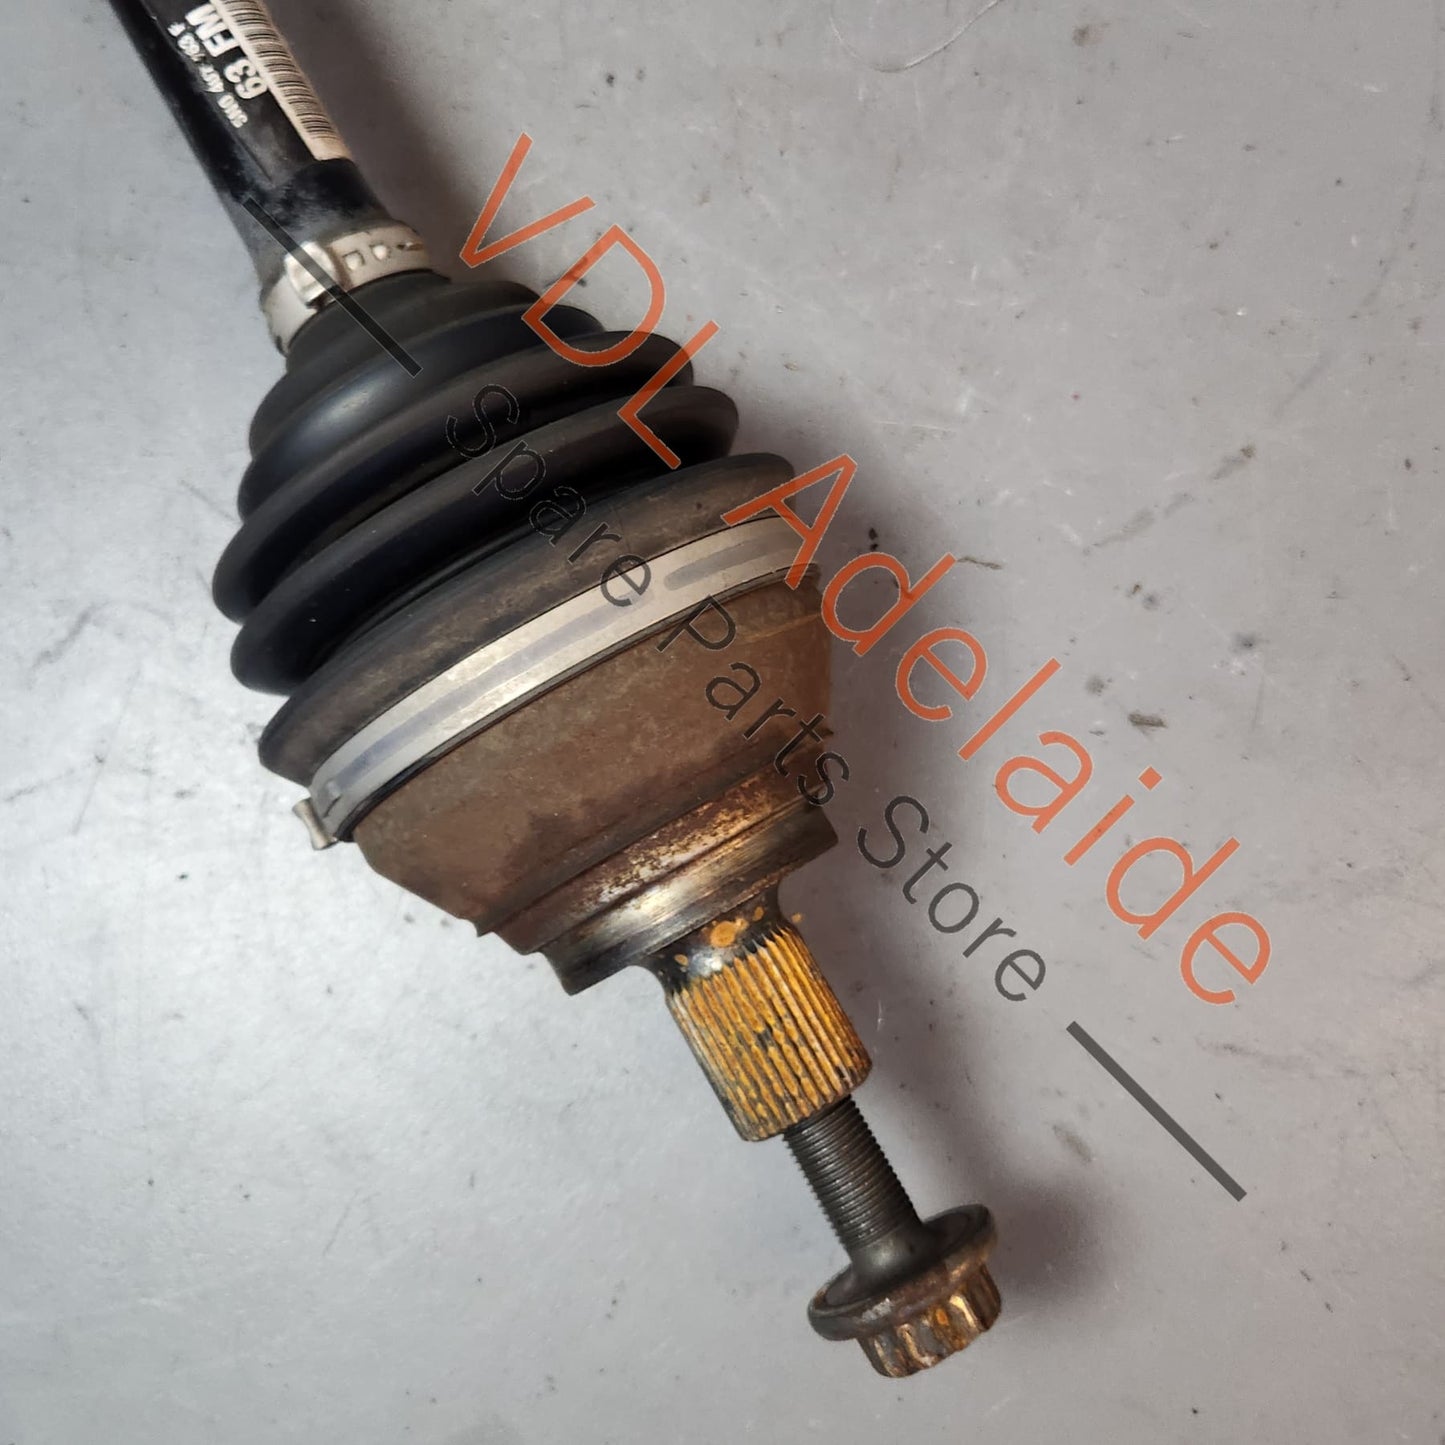 5N0407763F    Audi RS3 8V LHS Left Front Drive Shaft with CV Joints DQ500 5N0407763F 63FM